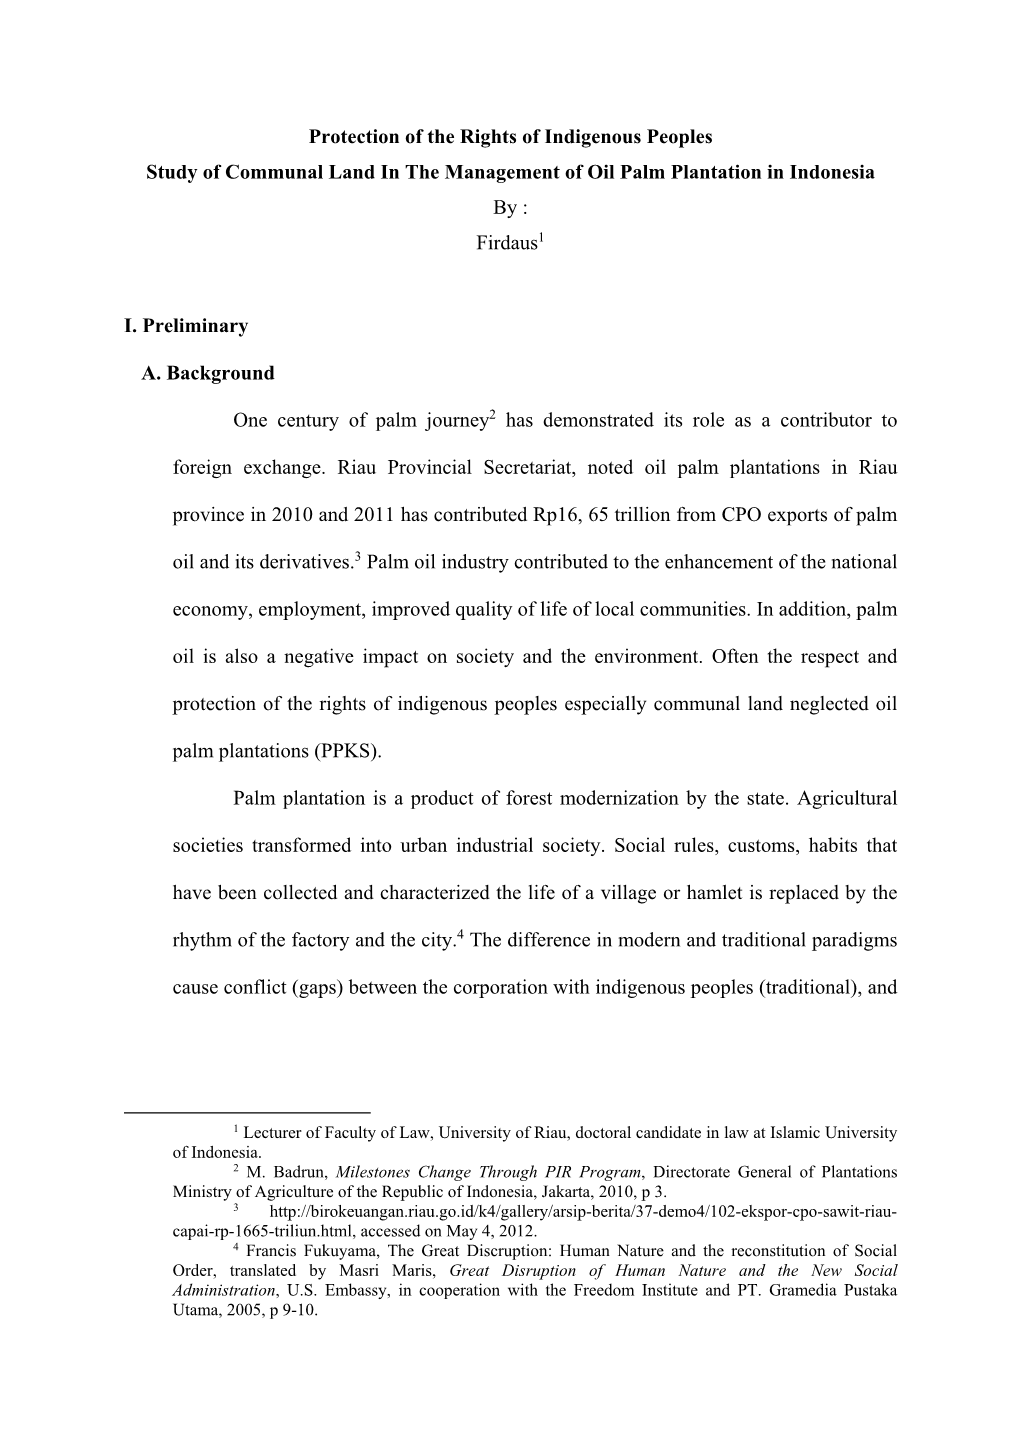 Protection of the Rights of Indigenous Peoples Study of Communal Land in the Management of Oil Palm Plantation in Indonesia by : Firdaus1